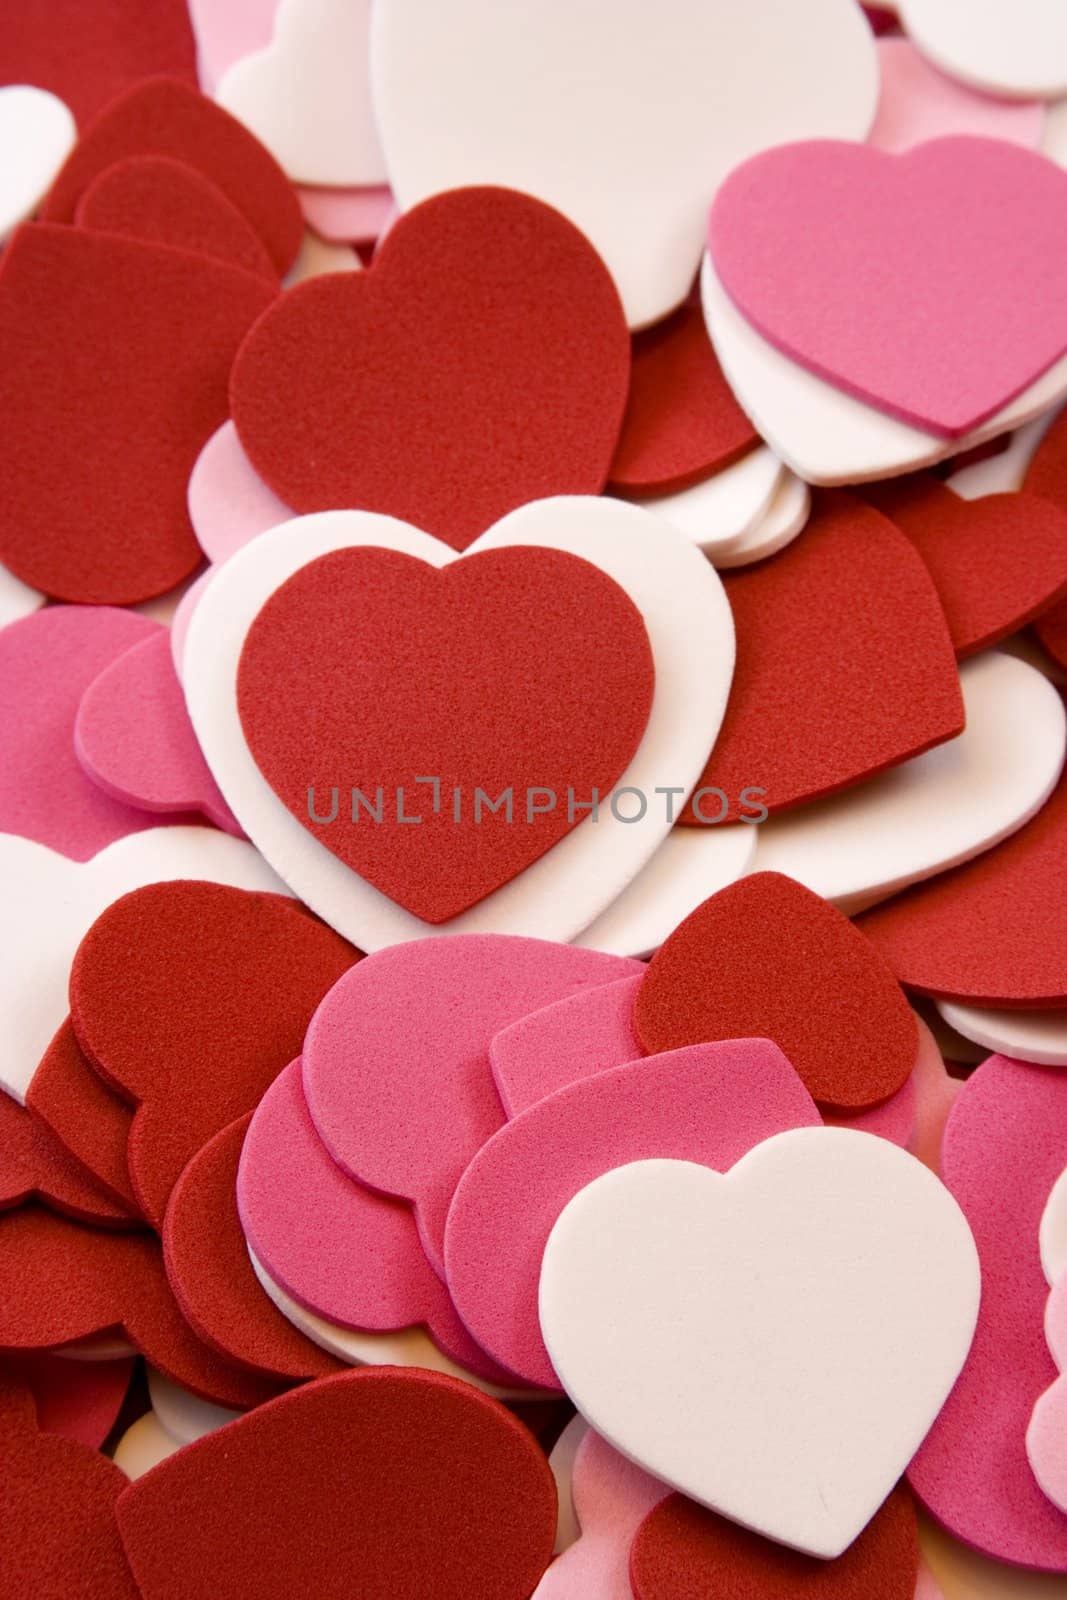 Heart foam cut outs stacked on top of each other pink, red, and white nice background image